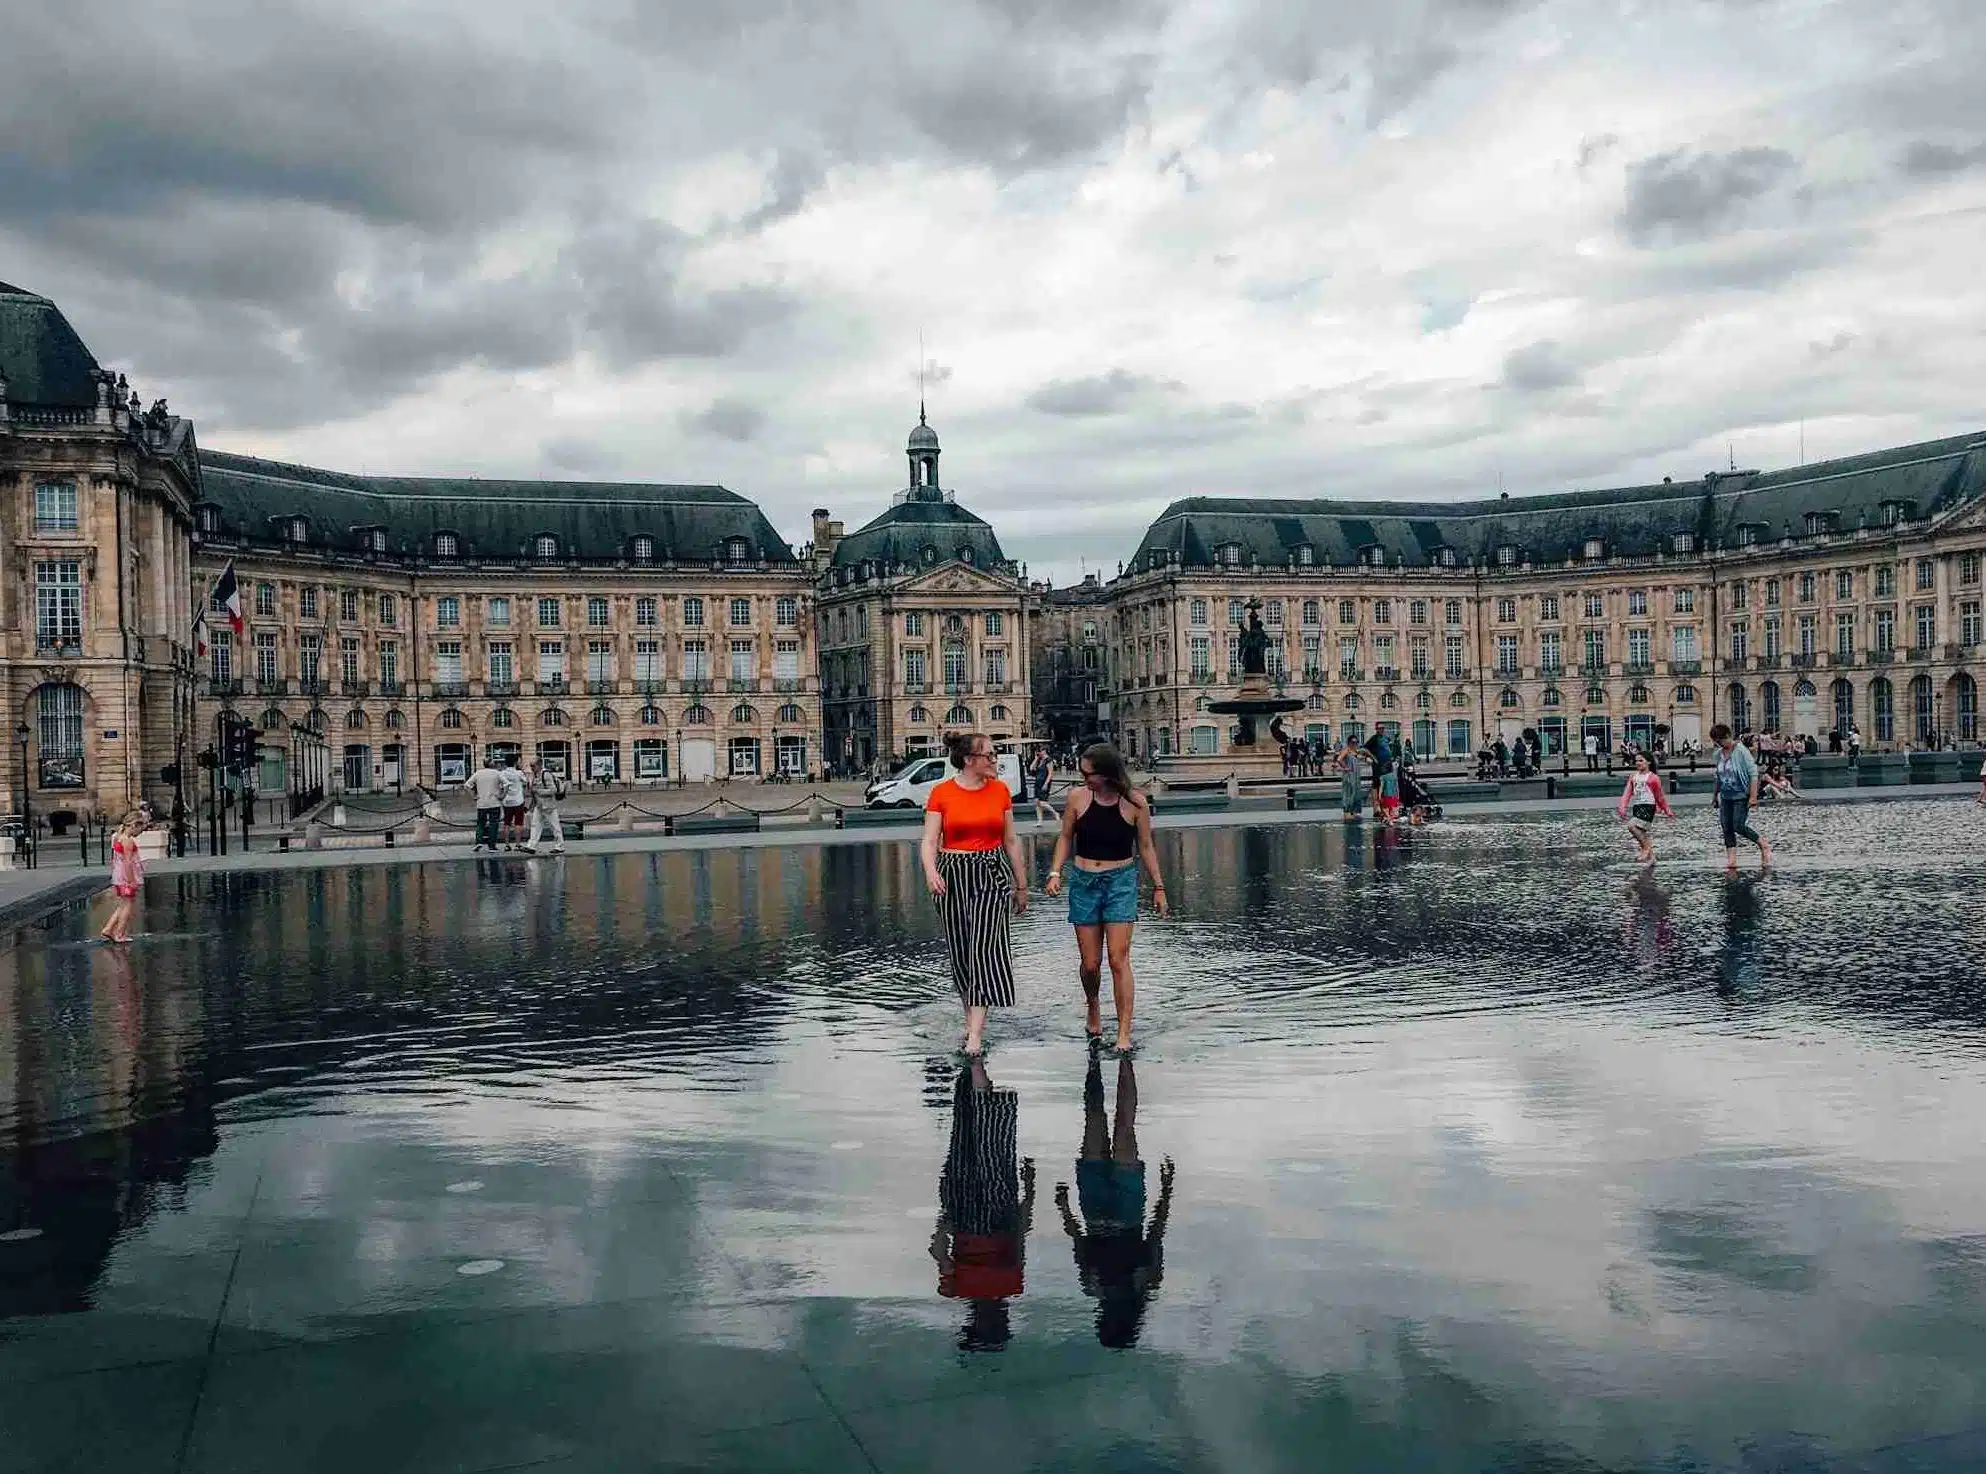 2 girls walking across the Miroir d'eau, a shallow pool of water, on a cloudy day. This is one of the top things to do in Bordeaux